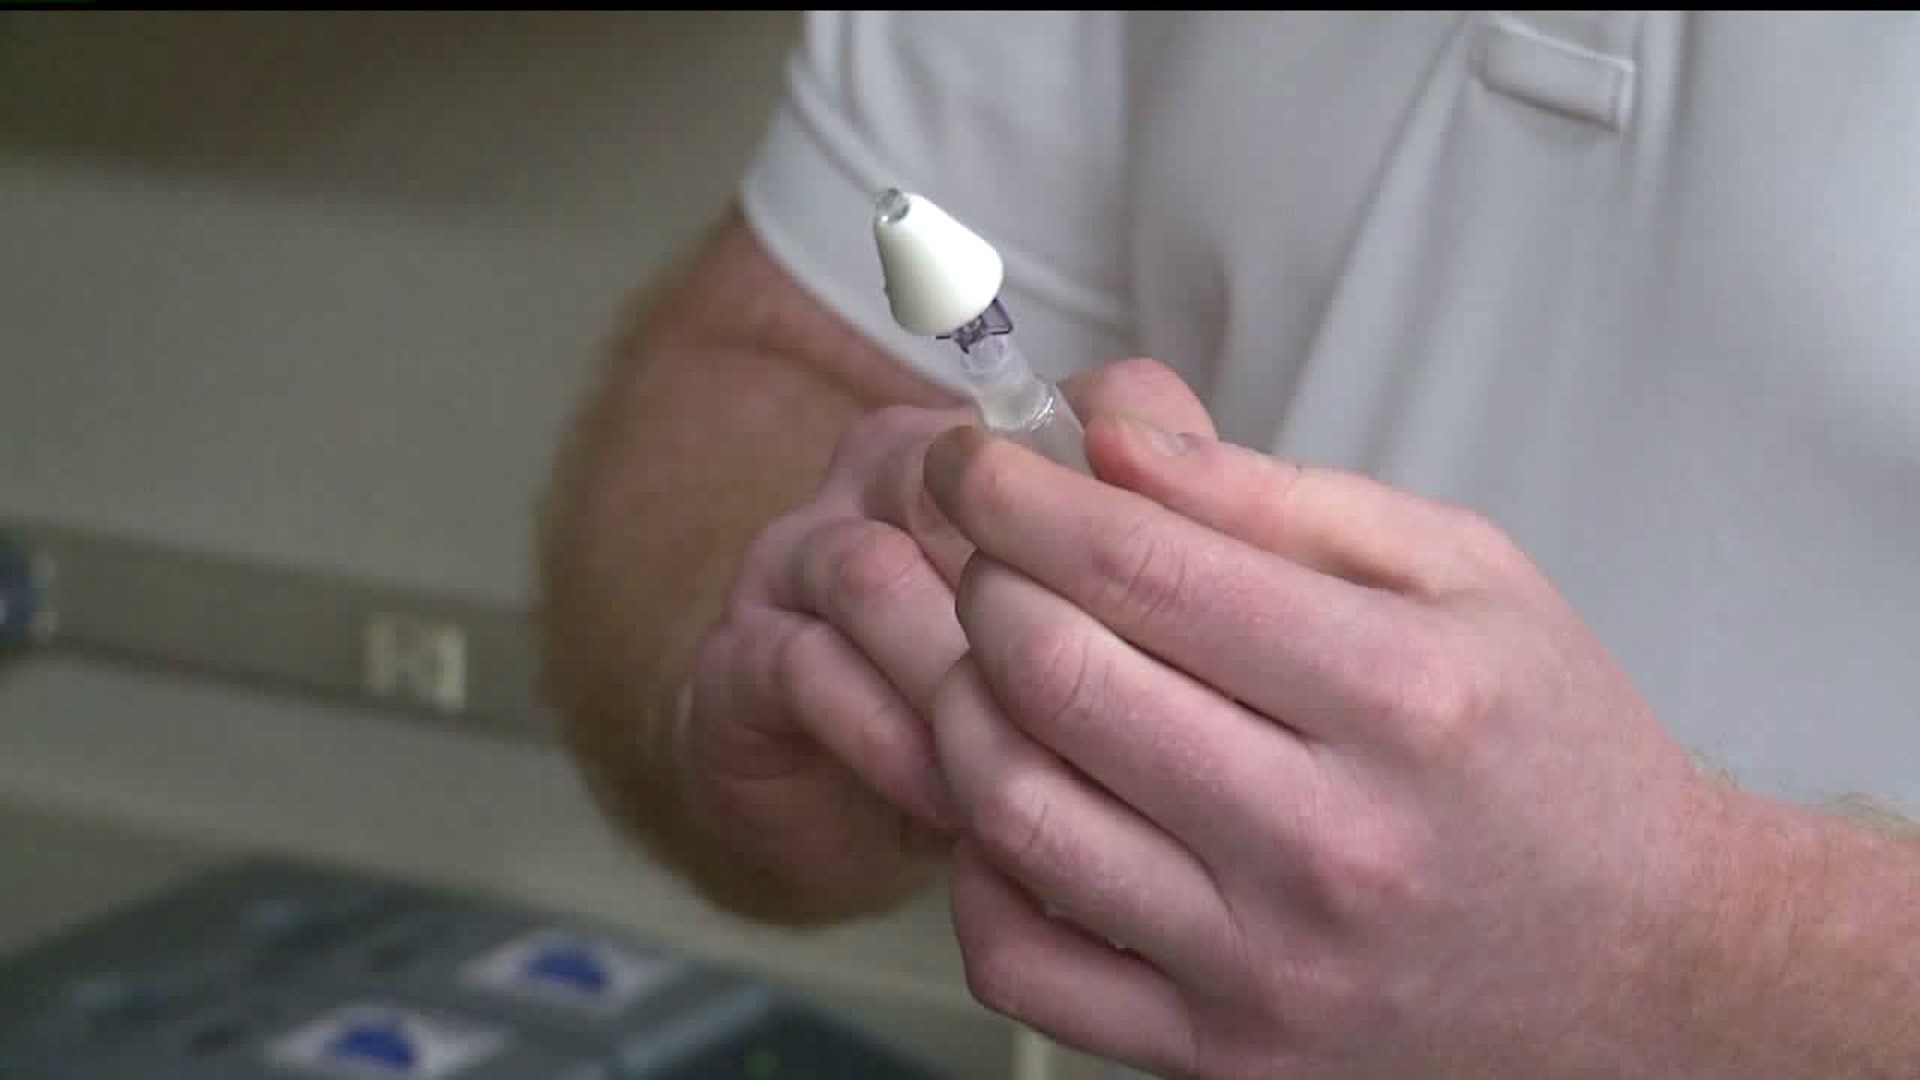 First responders now able to leave Naloxone with patients under disaster declaration